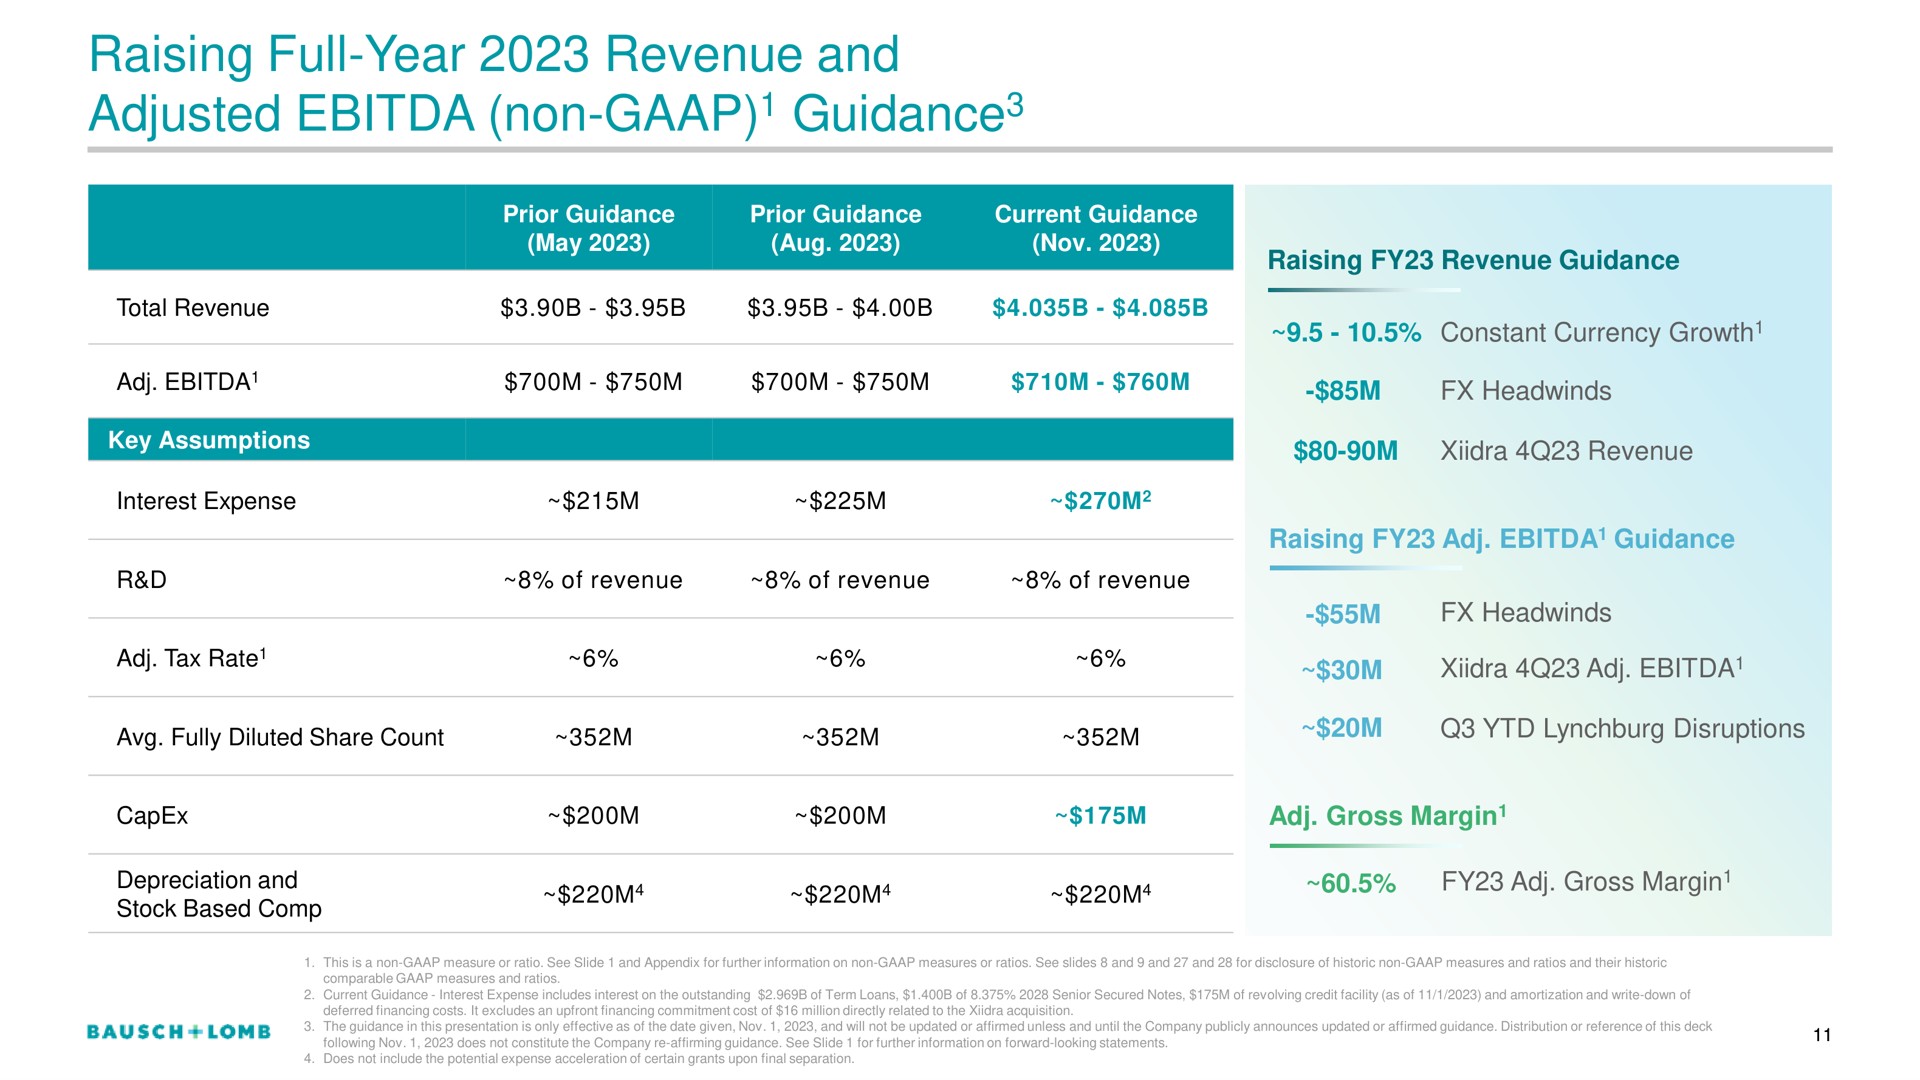 raising full year revenue and adjusted non guidance guidance | Bausch+Lomb